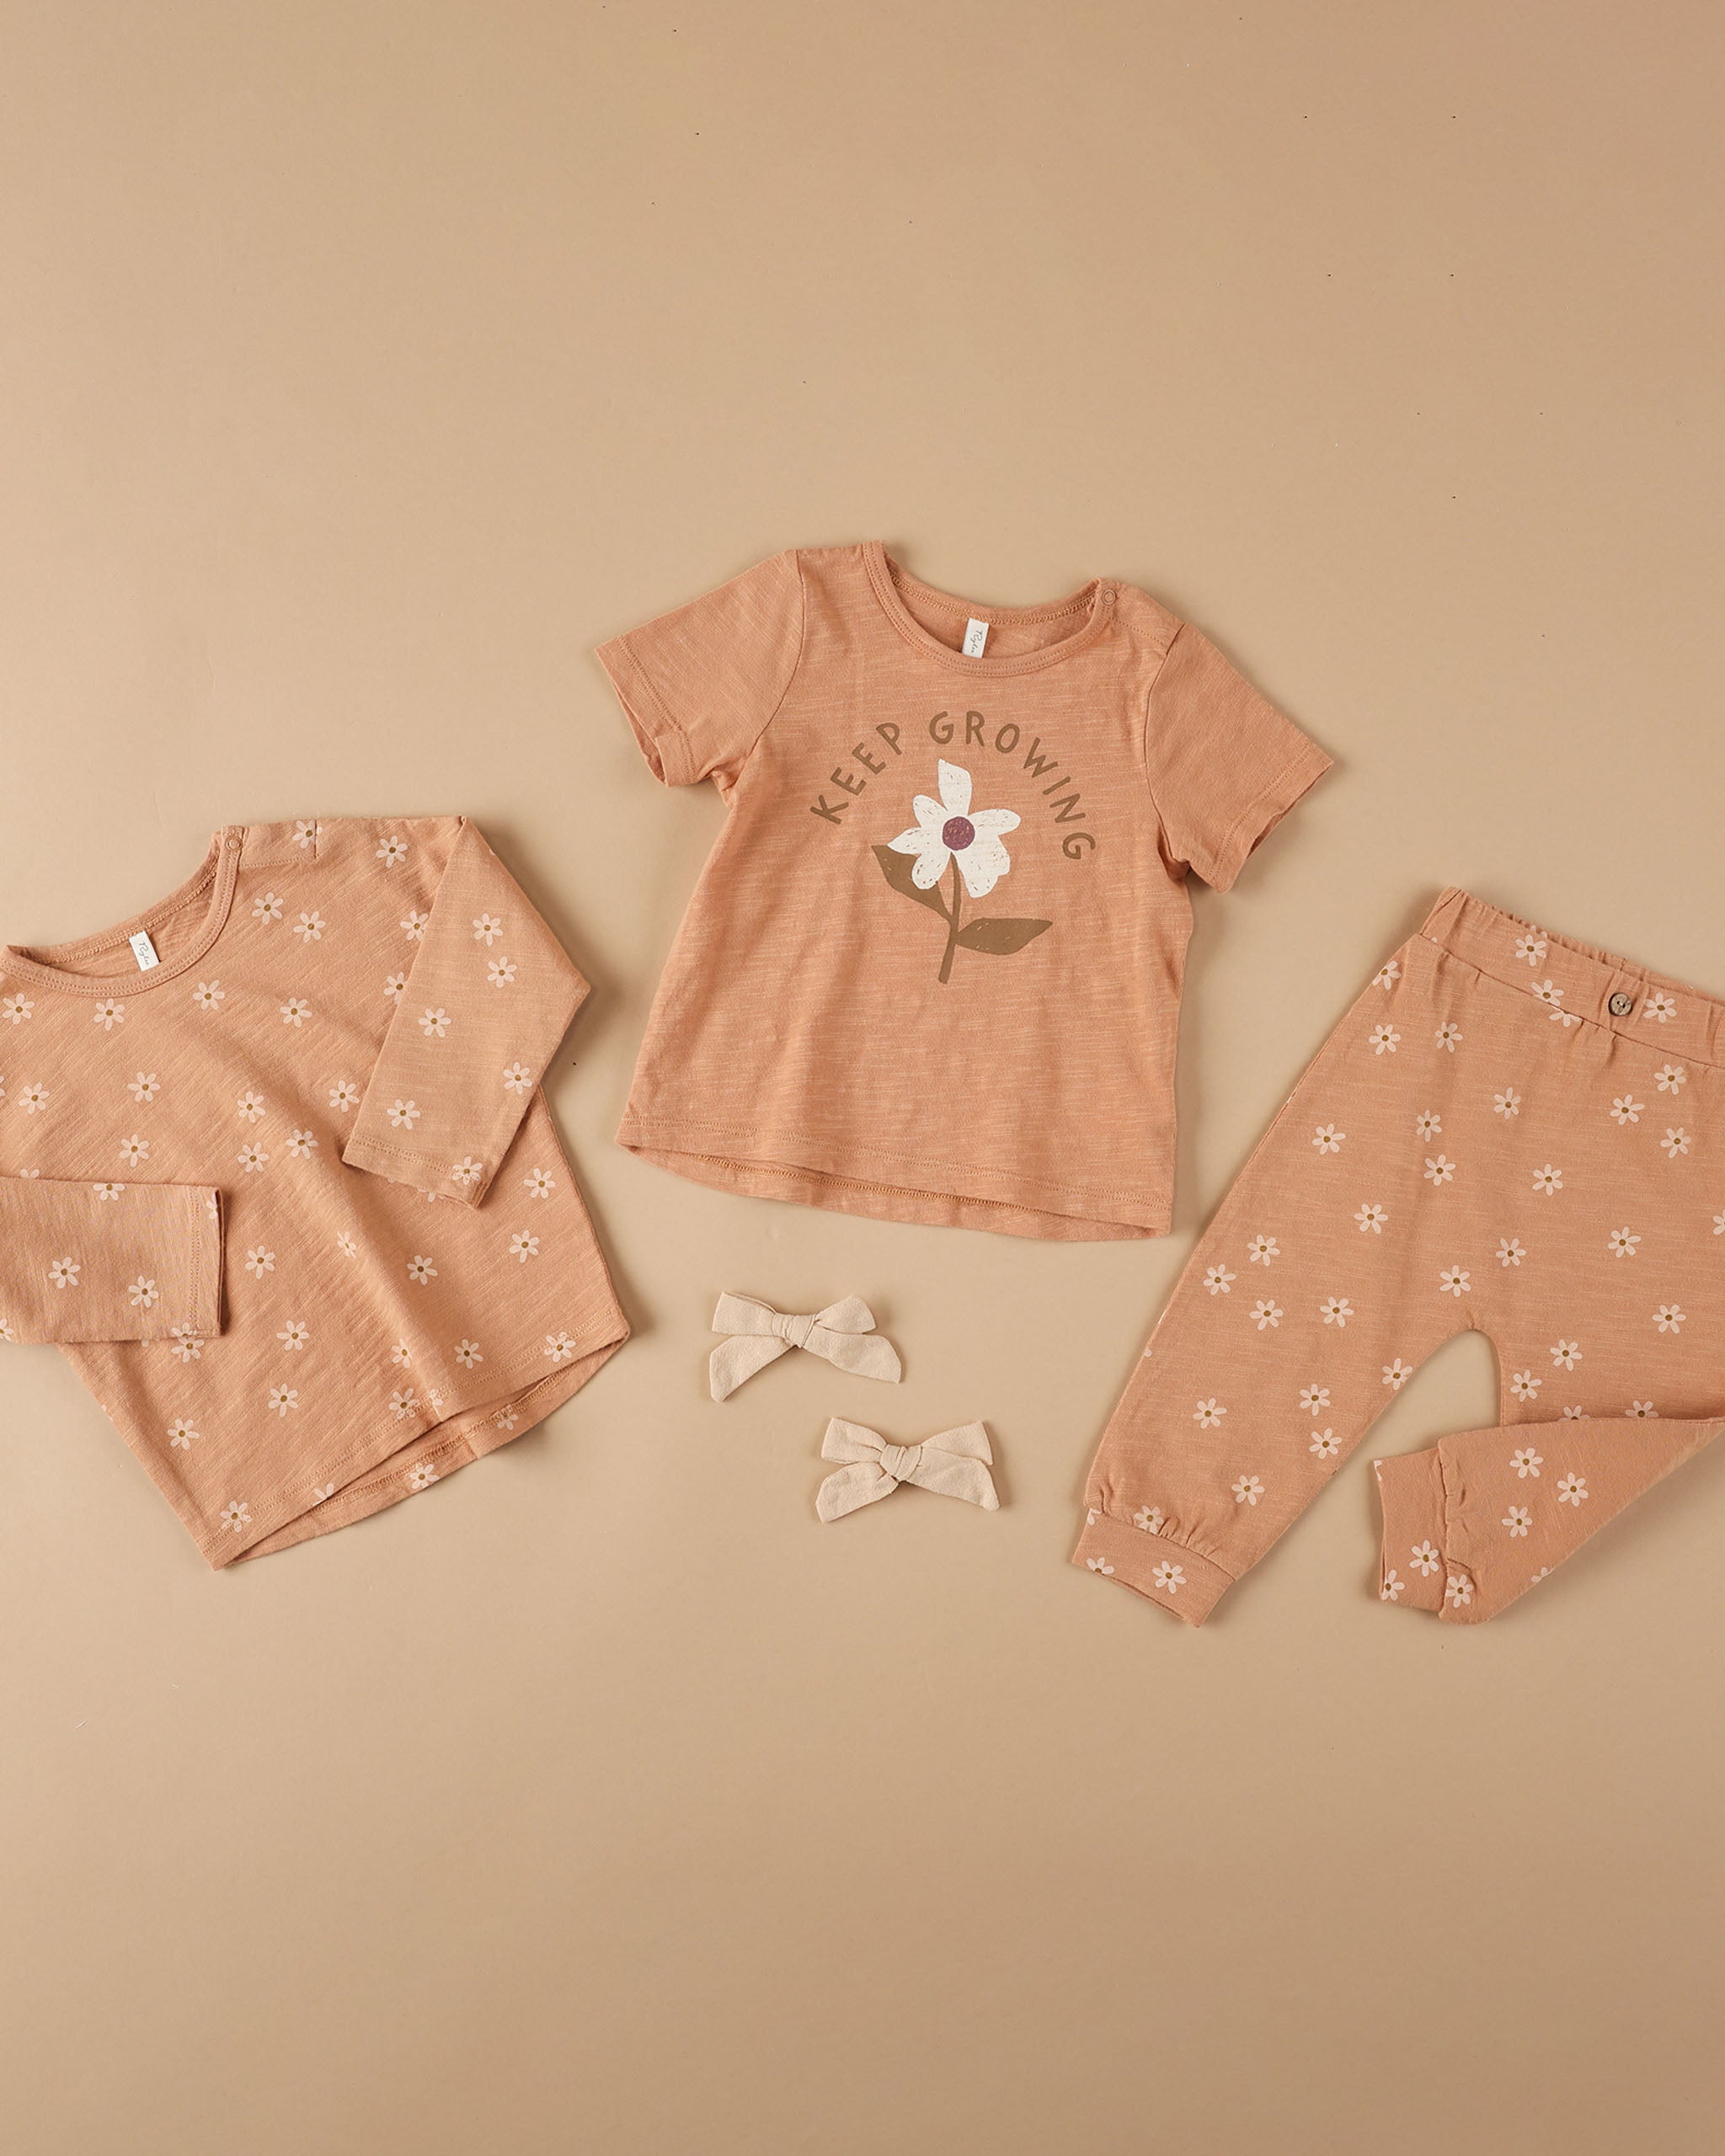 Basic Tee || Keep Growing - Rylee + Cru | Kids Clothes | Trendy Baby Clothes | Modern Infant Outfits |